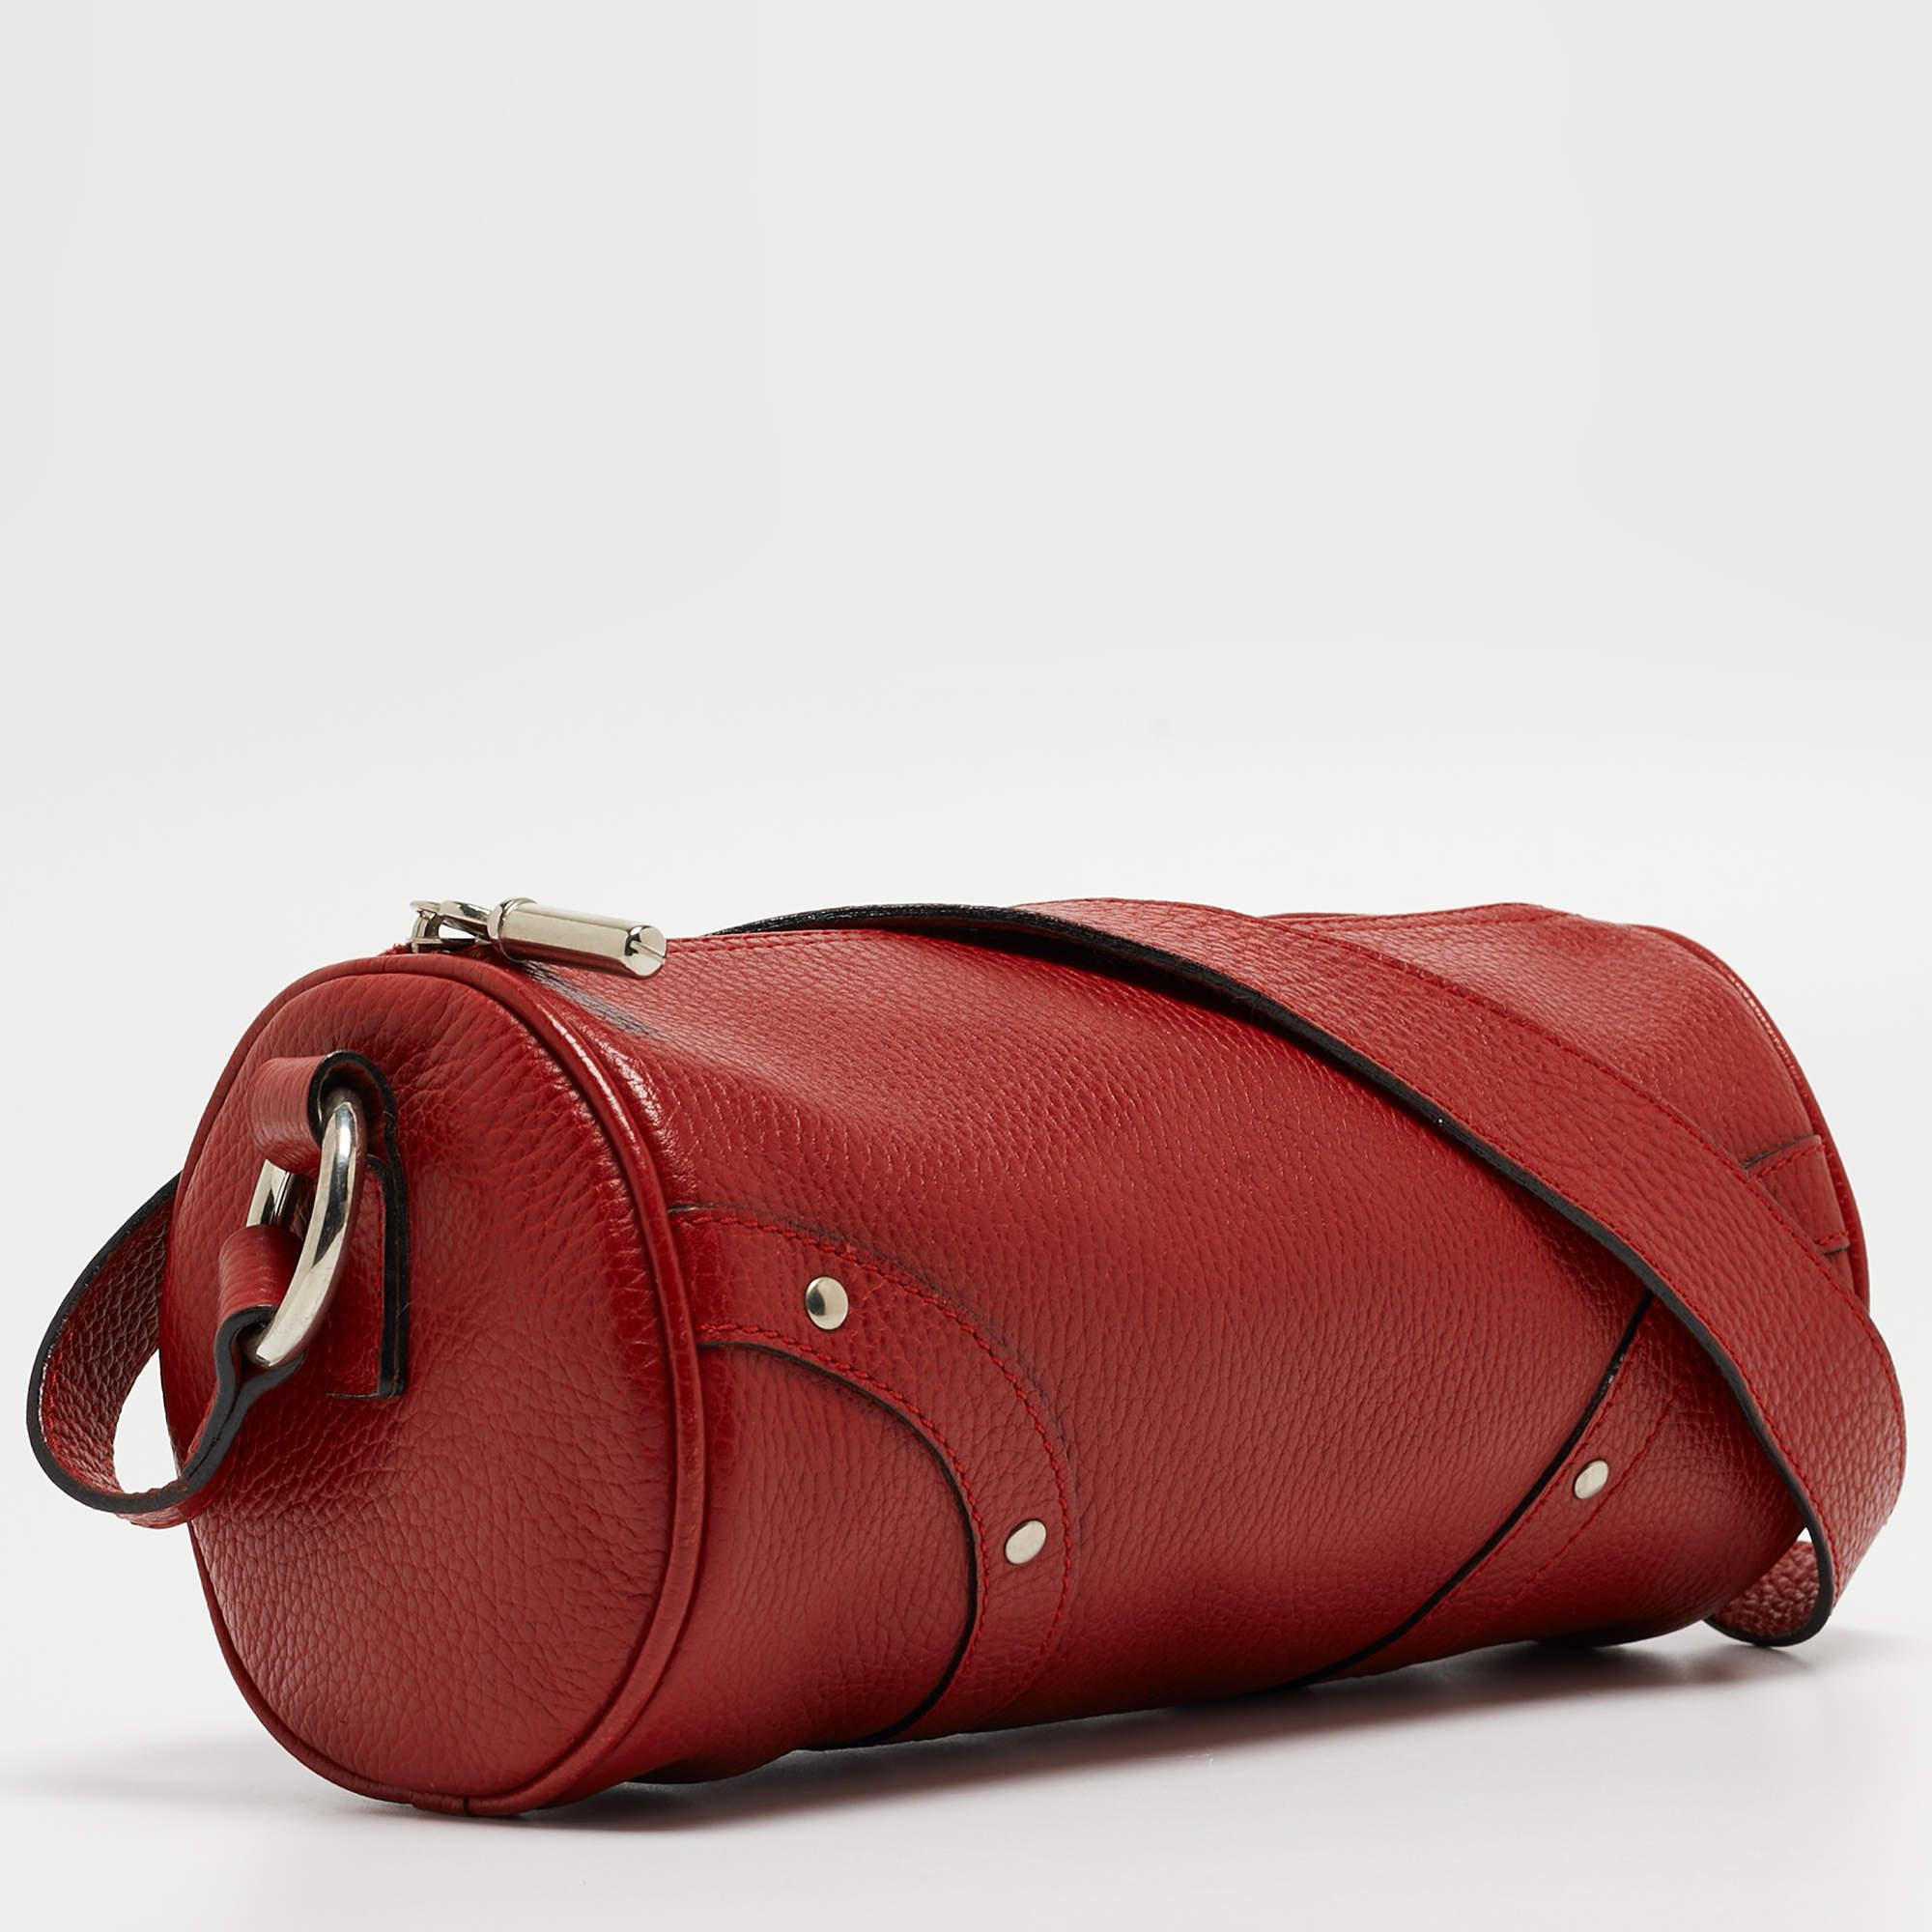 Burberry Red Leather Barrel Bag For Sale 9